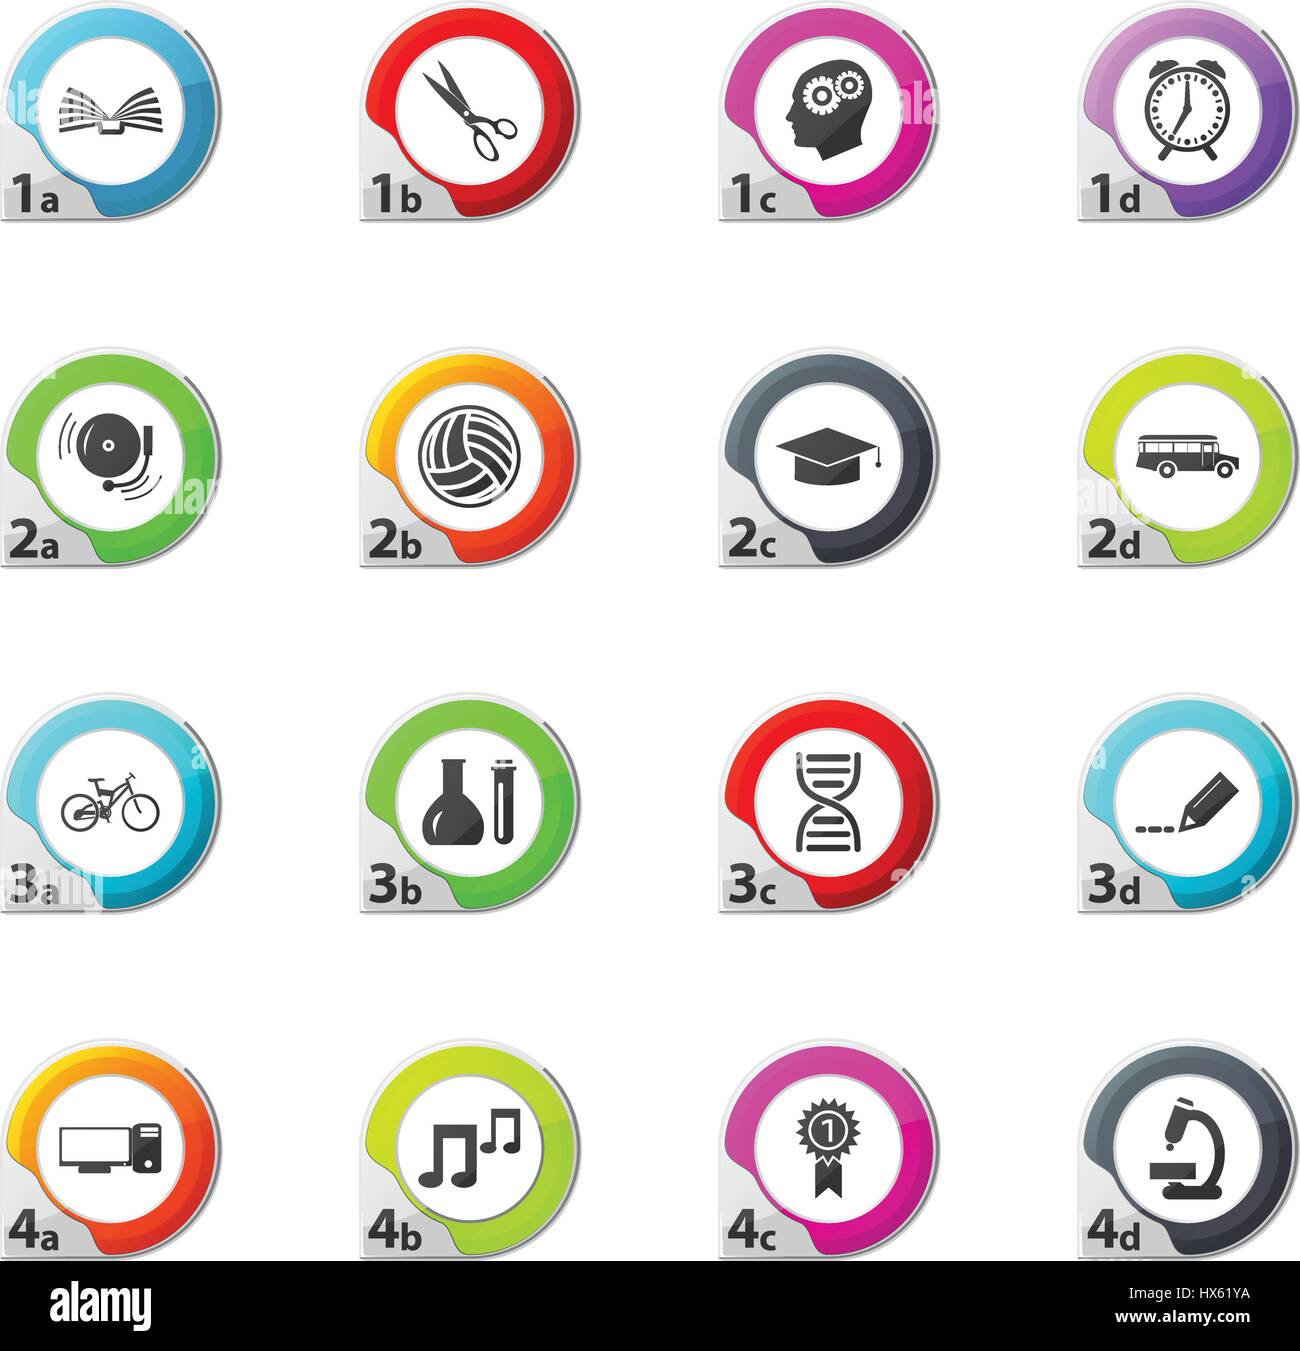 School web icons for user interface design Stock Vector